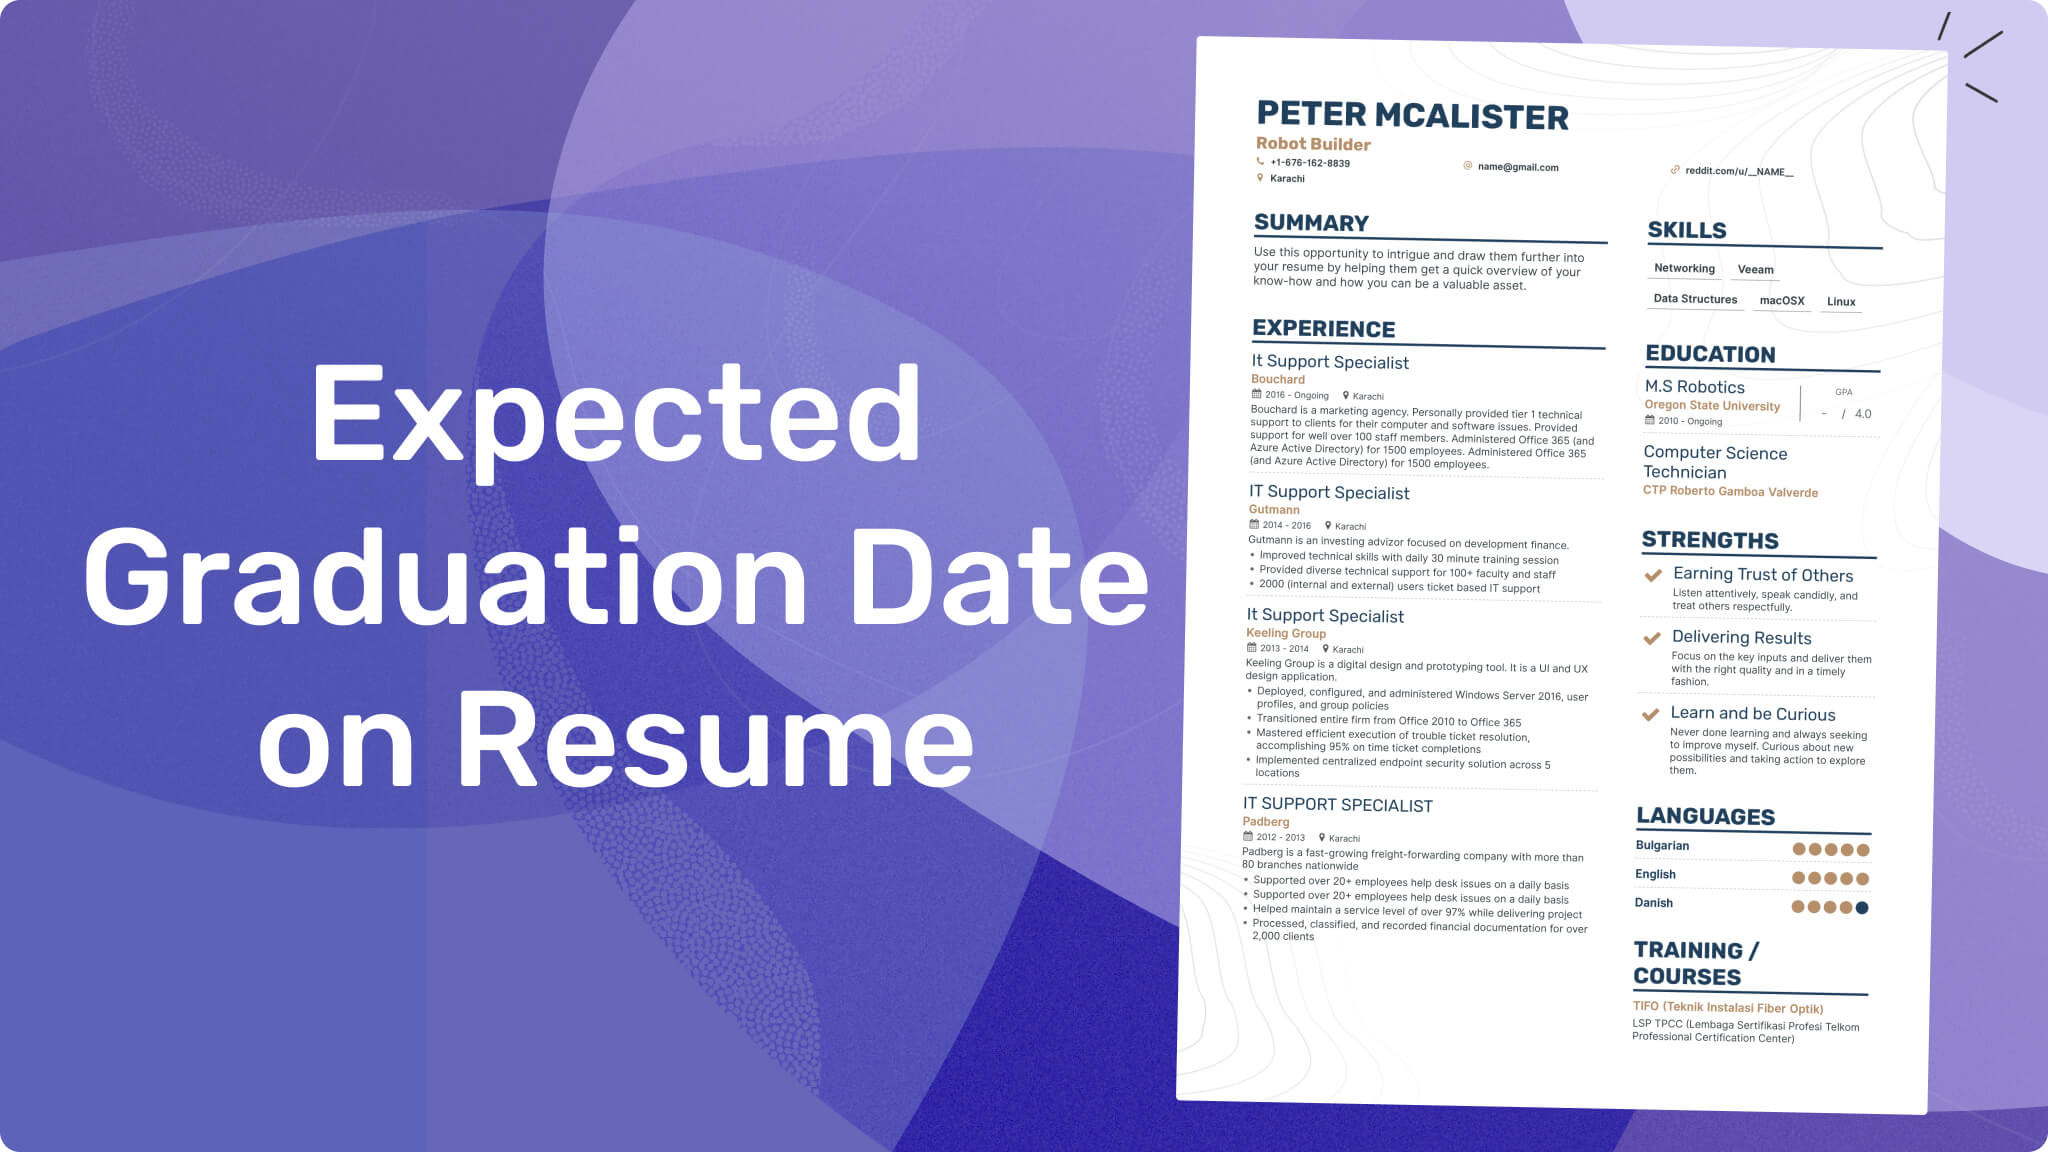 Sample Resume for Cps Energy Trainee Position Administrative assistant Resume Samples – A Step by Step Guide for …